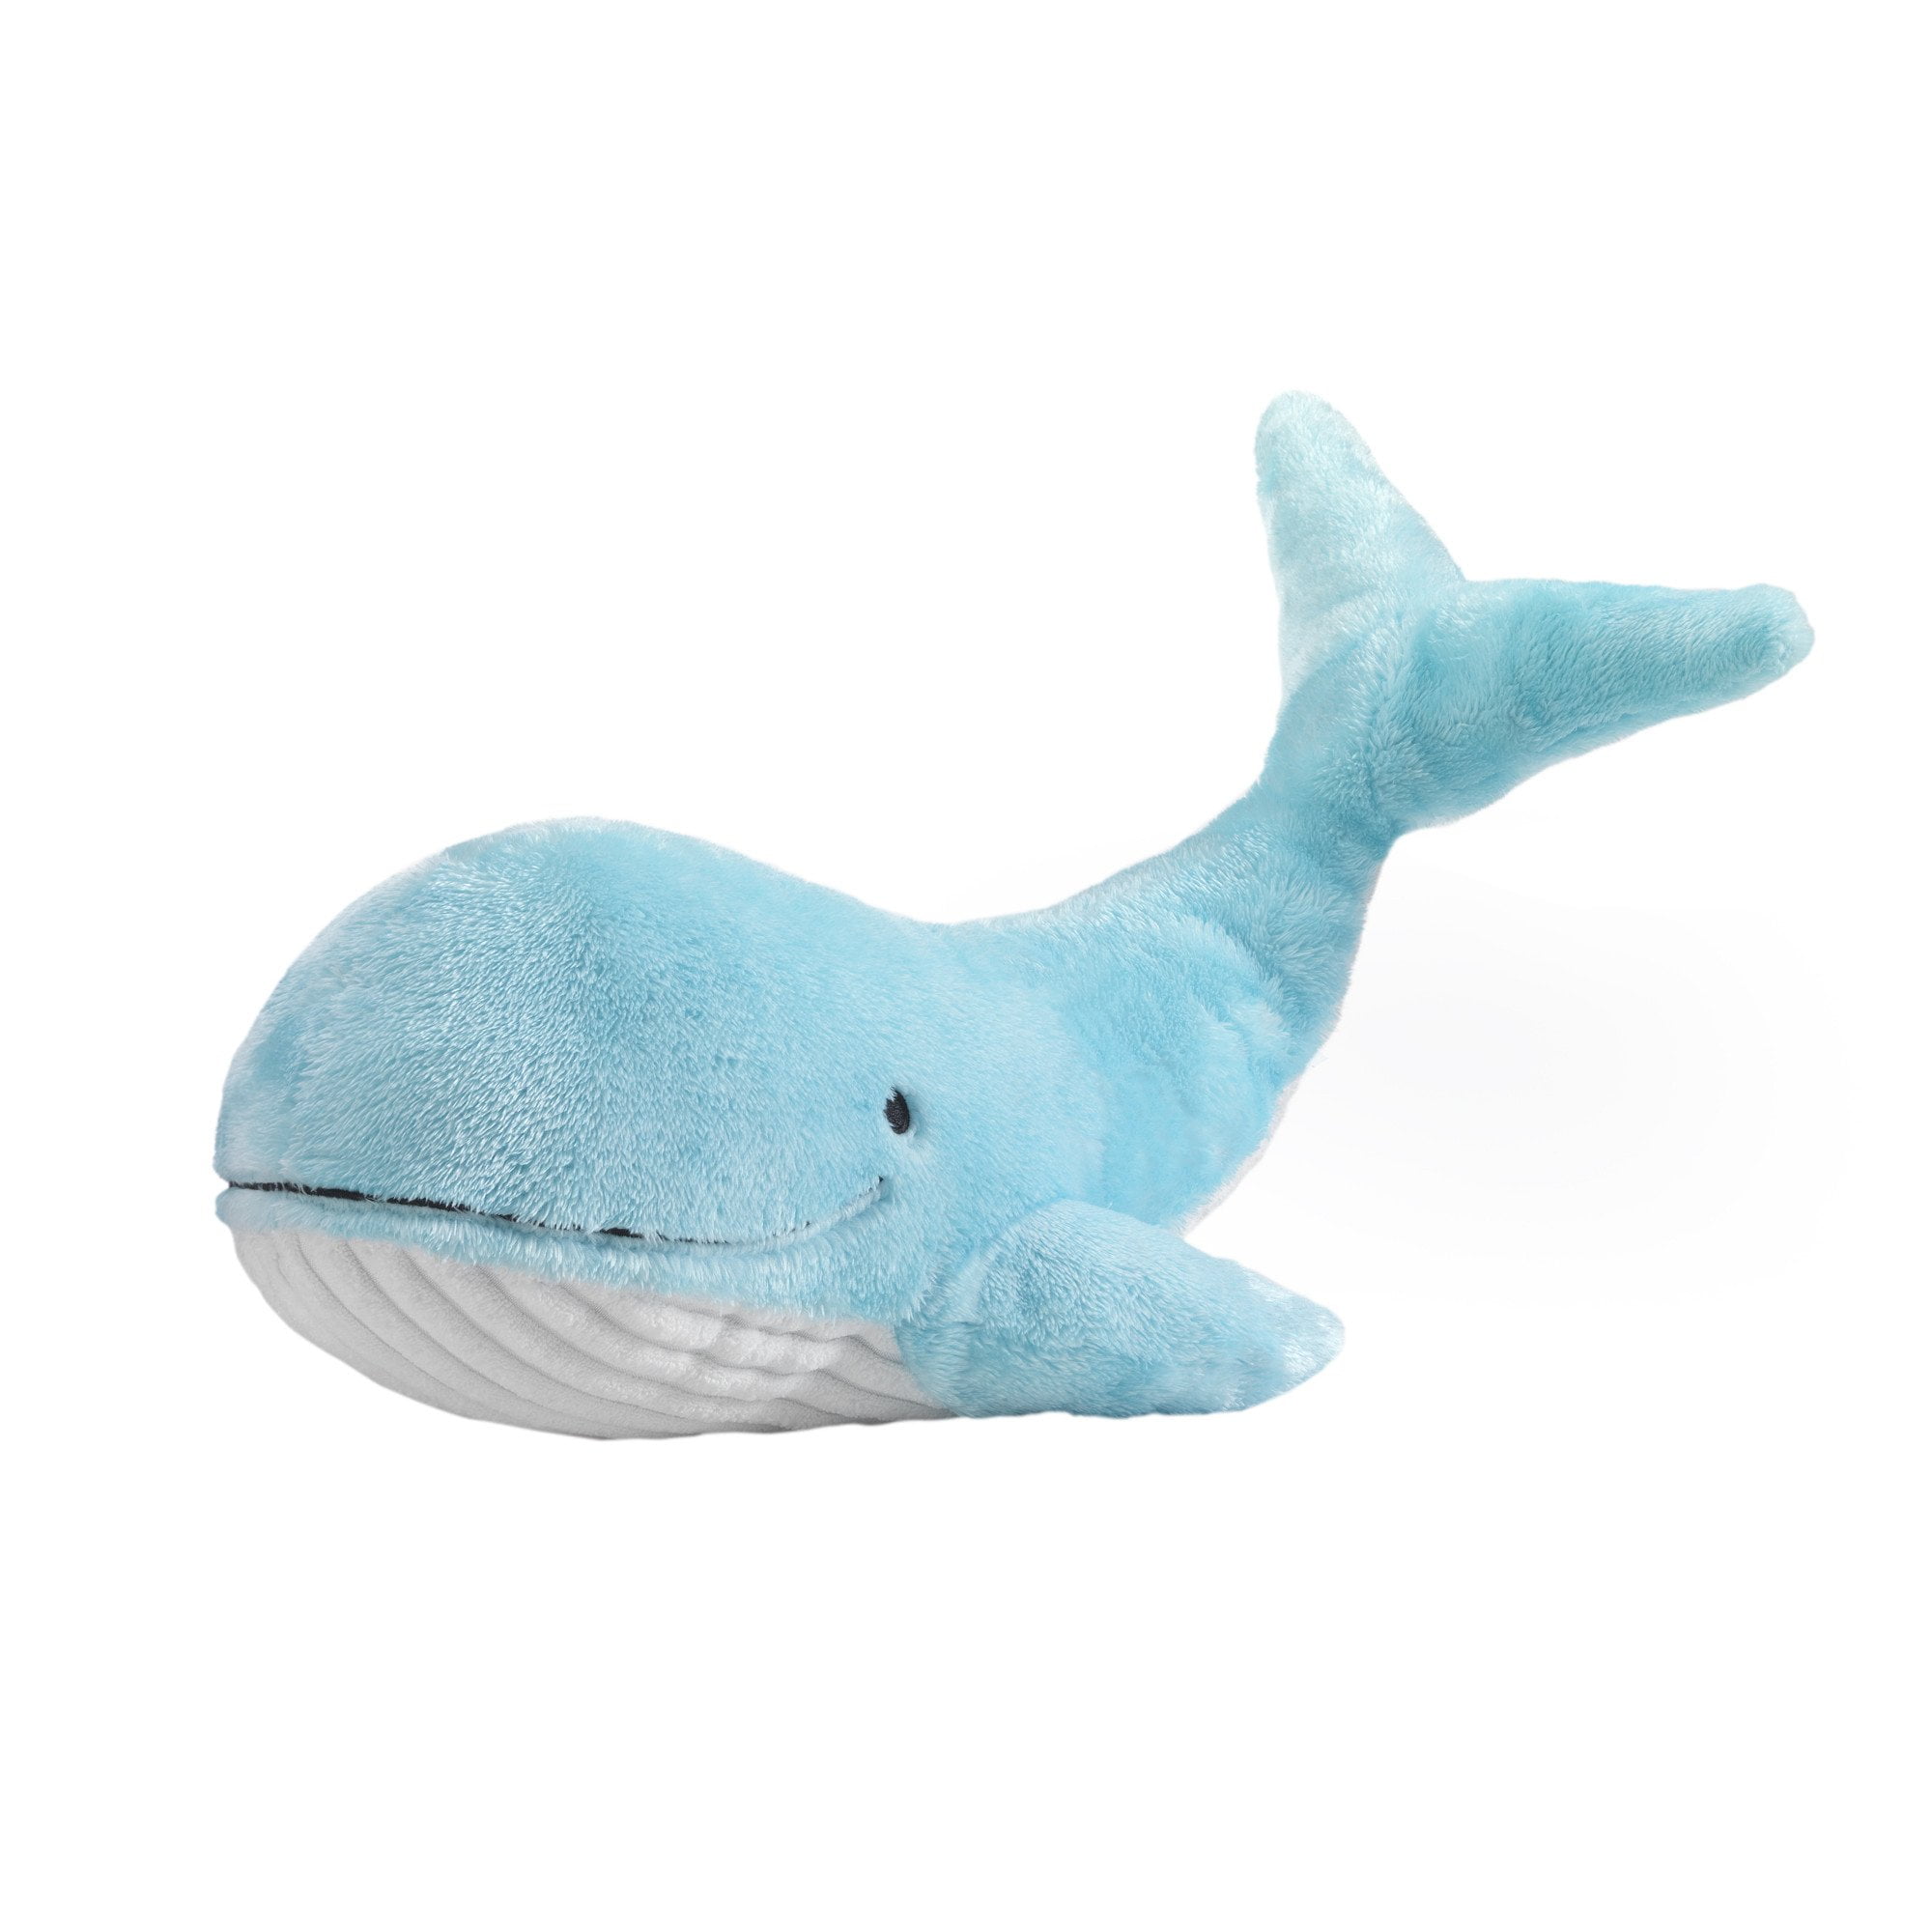 Lambs & Ivy Oceania Baby Soft Blue Whale Plush Stuffed Animal Toy ...